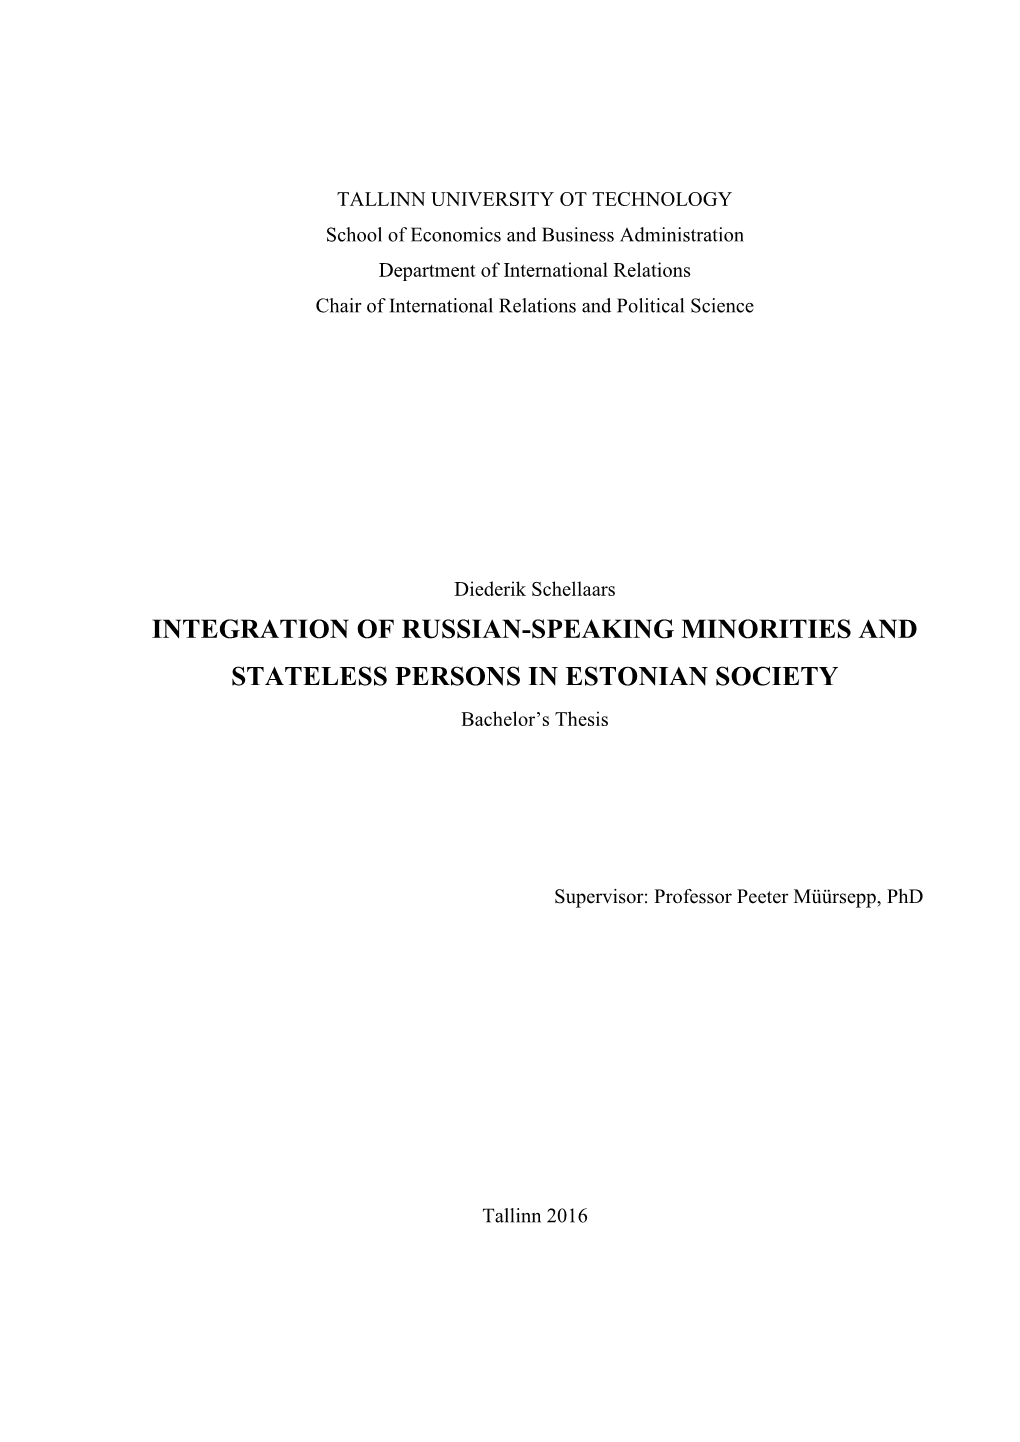 INTEGRATION of RUSSIAN-SPEAKING MINORITIES and STATELESS PERSONS in ESTONIAN SOCIETY Bachelor’S Thesis